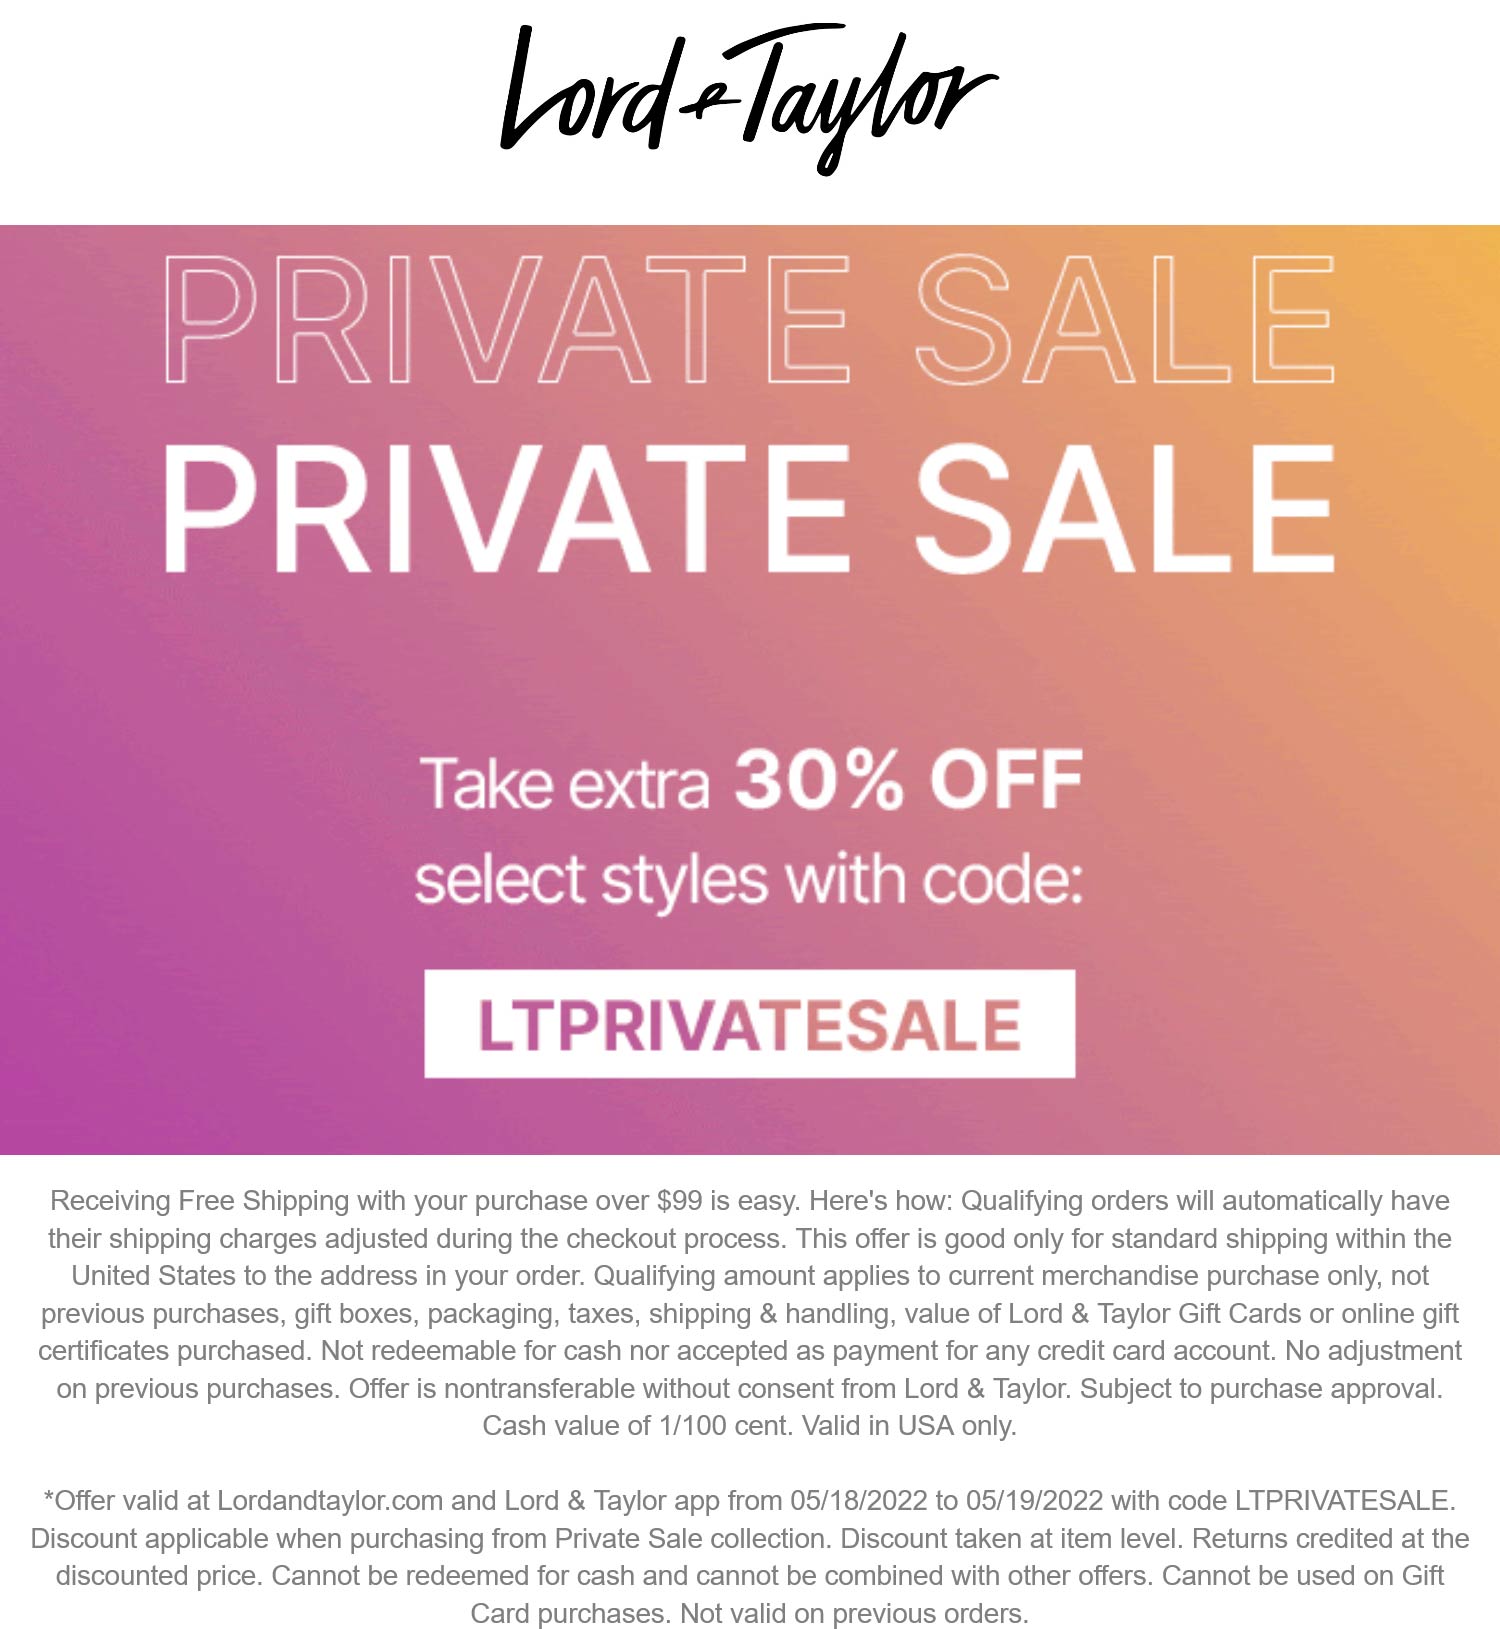 Lord & Taylor stores Coupon  Extra 30% off at Lord & Taylor via promo code LTPRIVATESALE #lordtaylor 